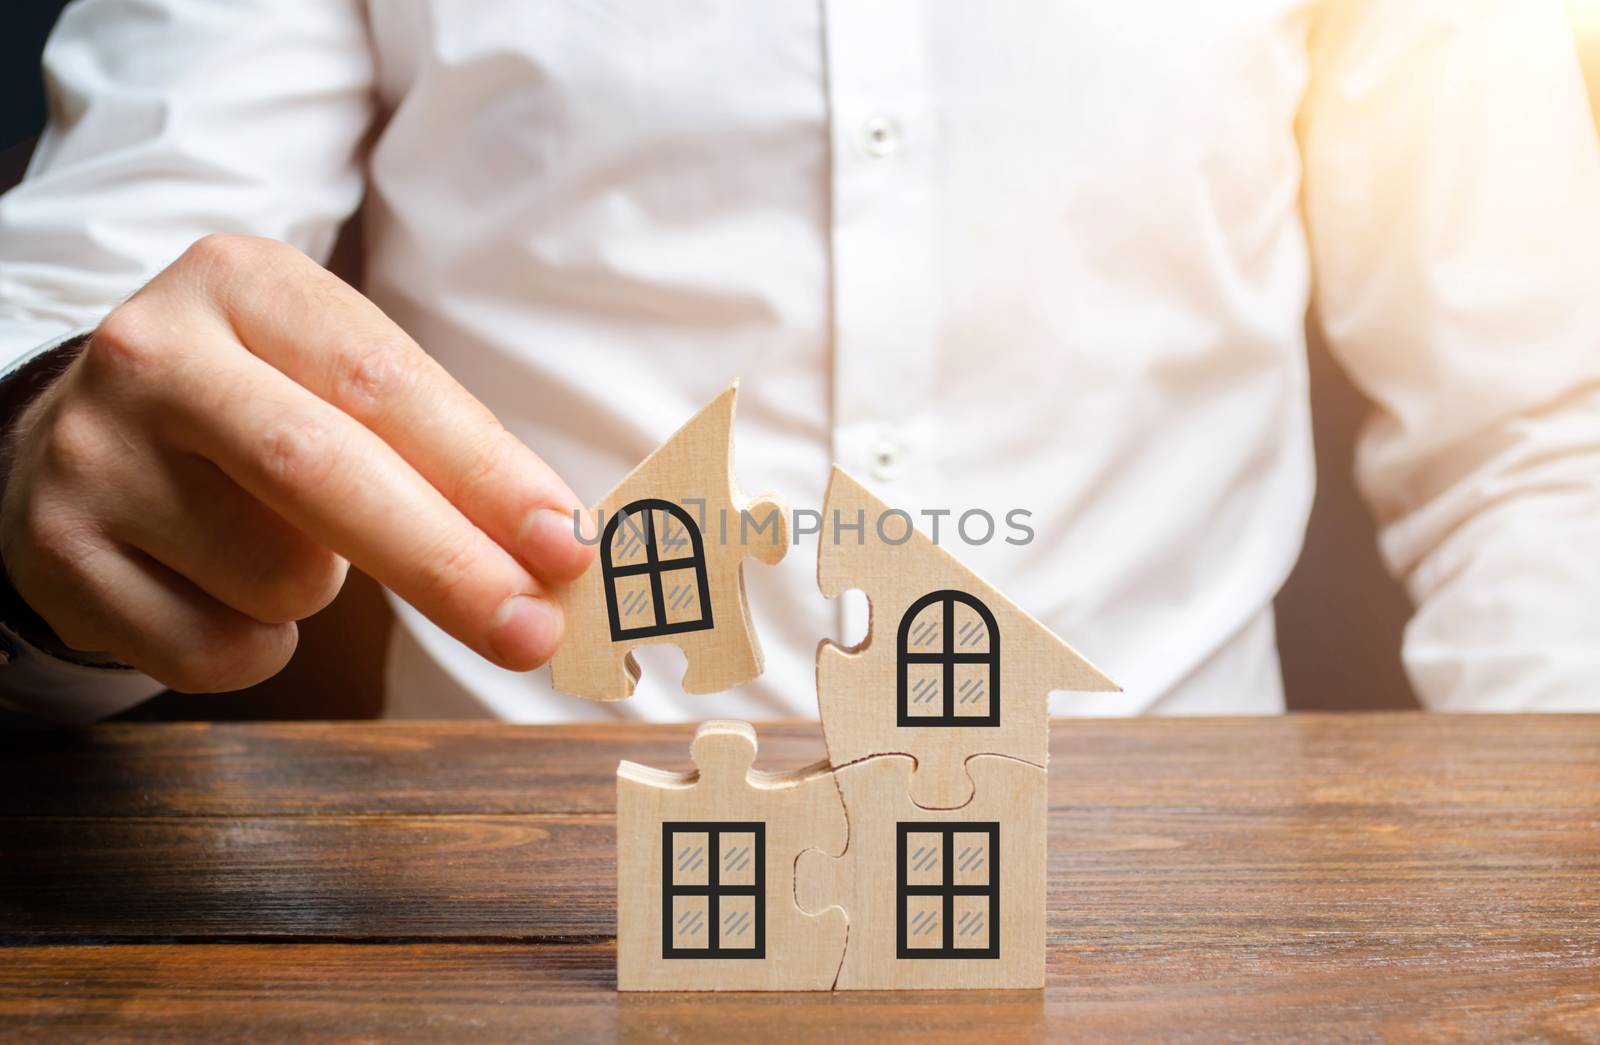 A man collects a house of puzzles. Construction of your own residential building. Mortgage loan, residential expansion and improvement of living conditions. Creating a family. The concept of stability